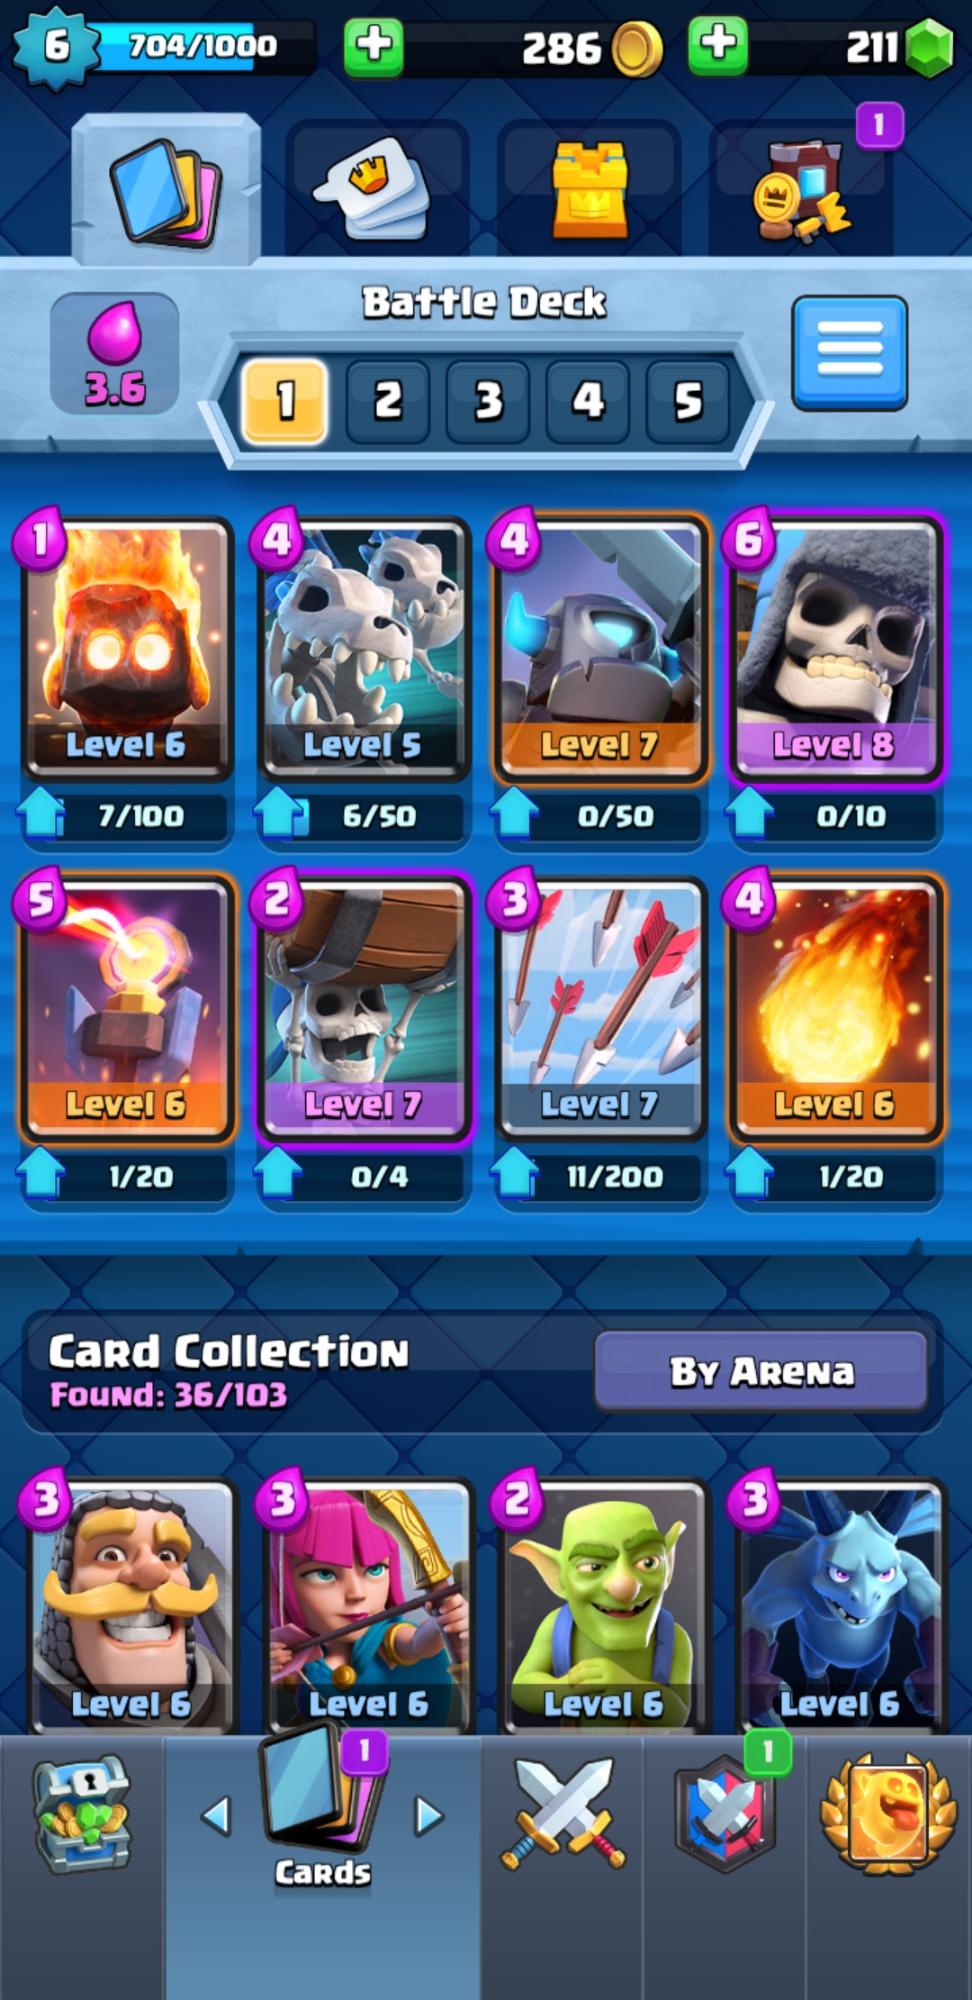 Guide to the best Clash Royale deck for Arena 4 